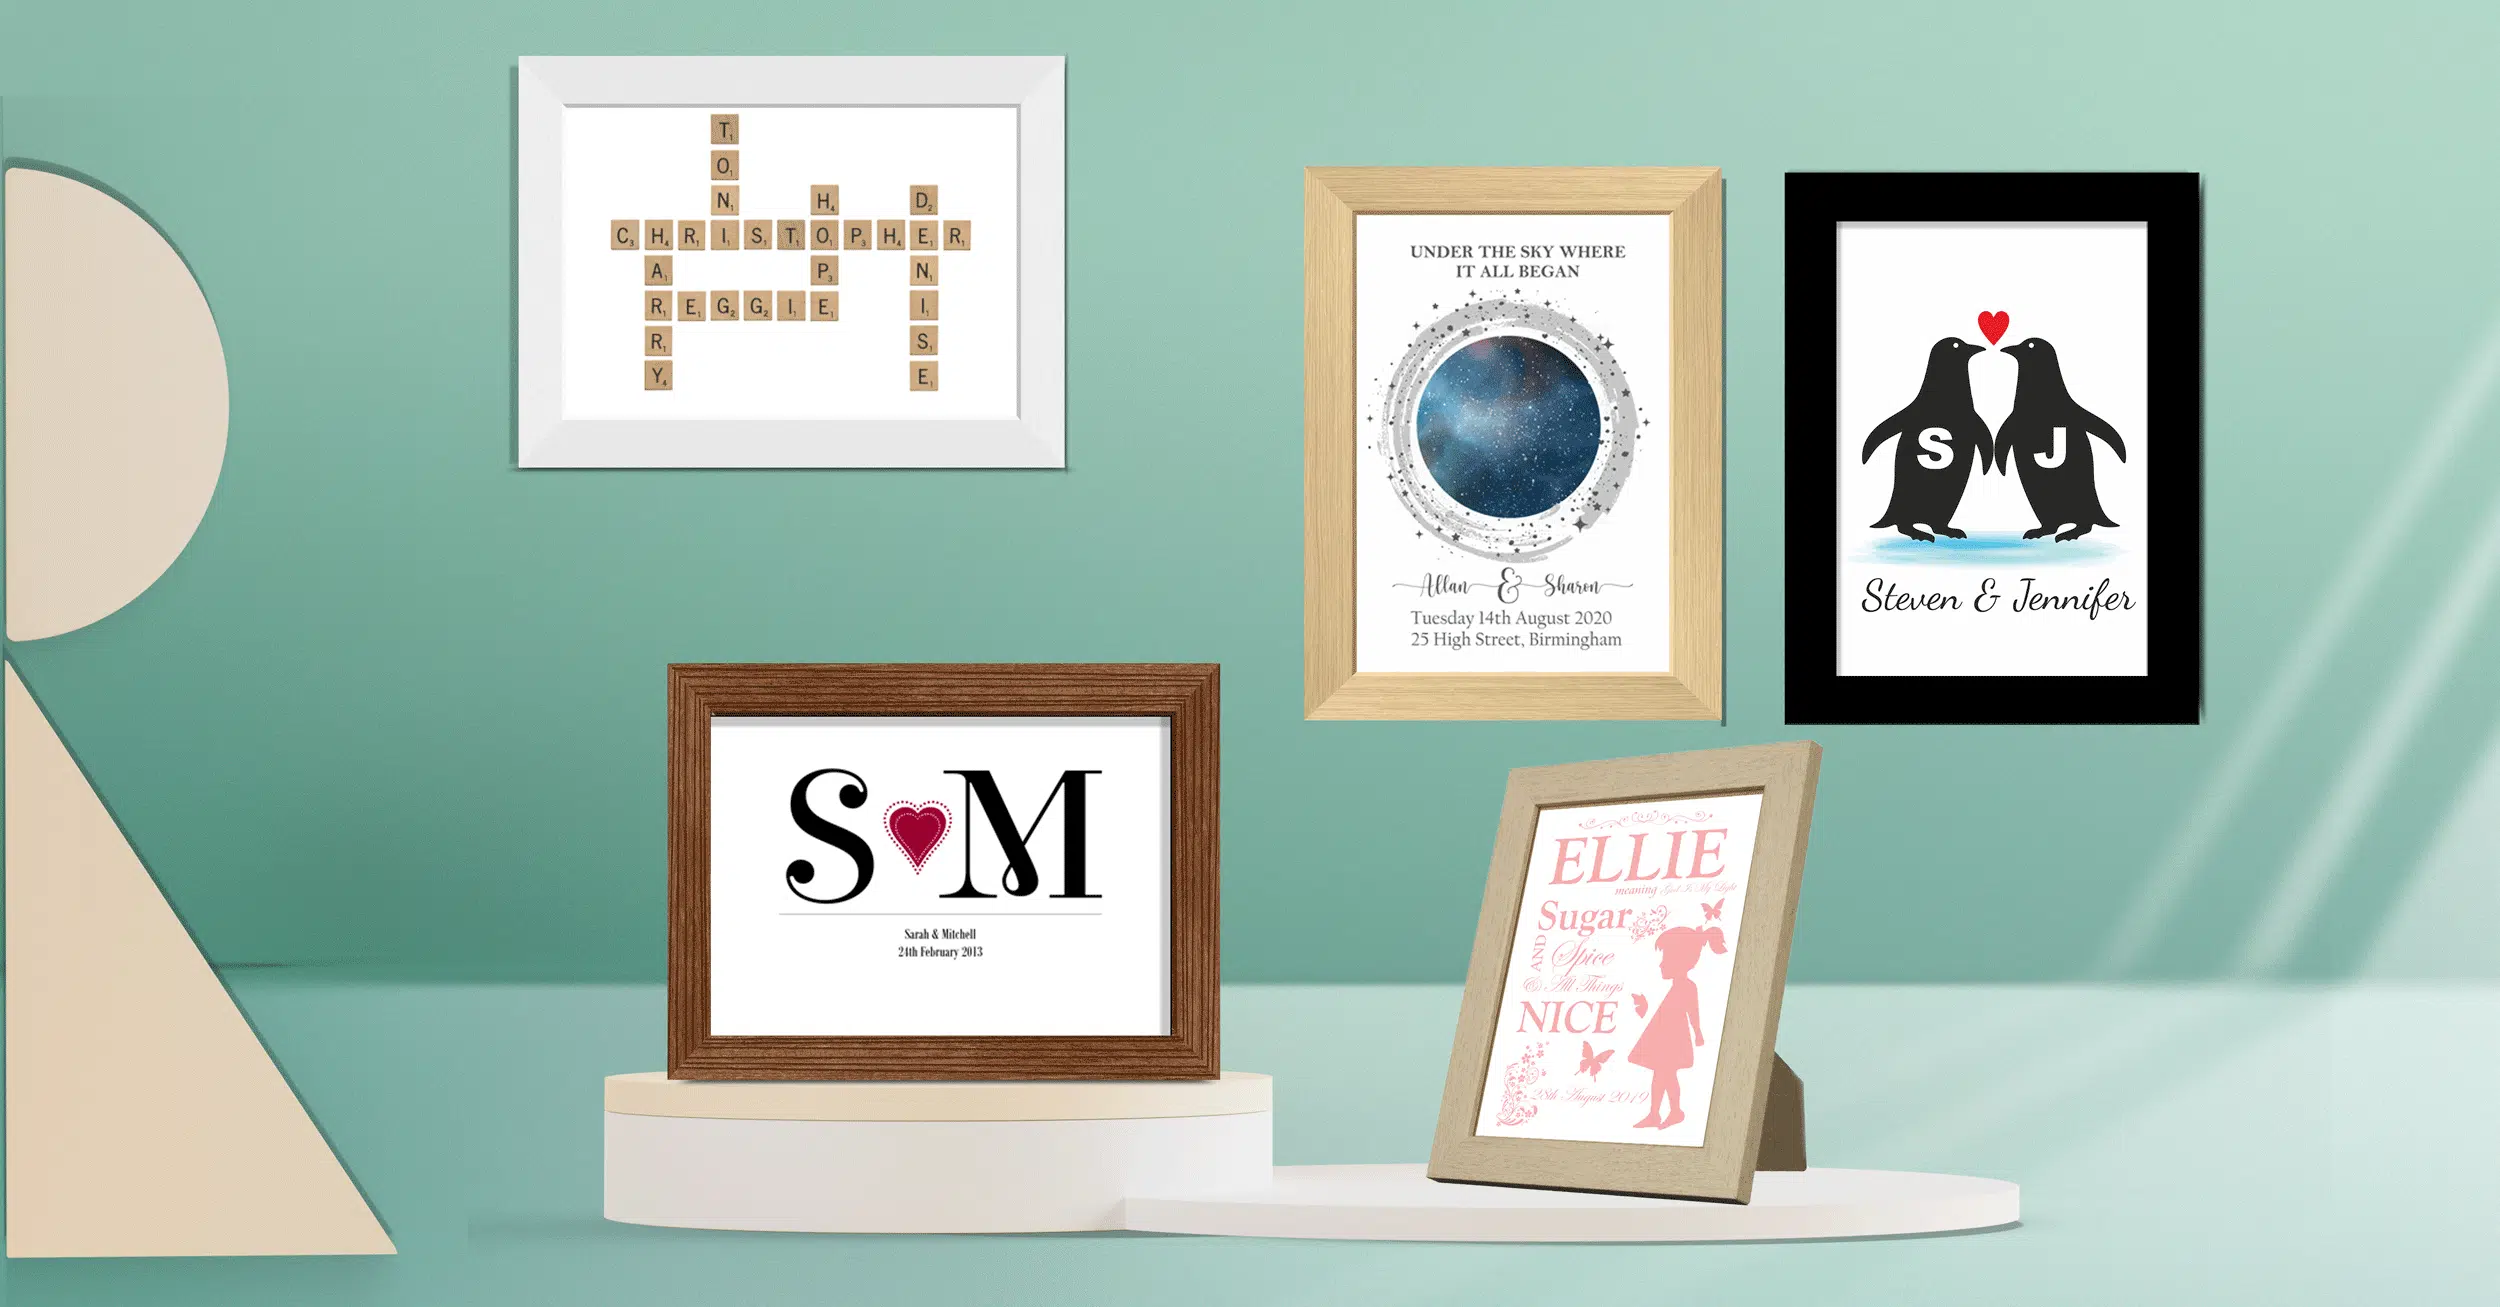 Best Mum Ever – Mother’s Day Print Gifts For Her